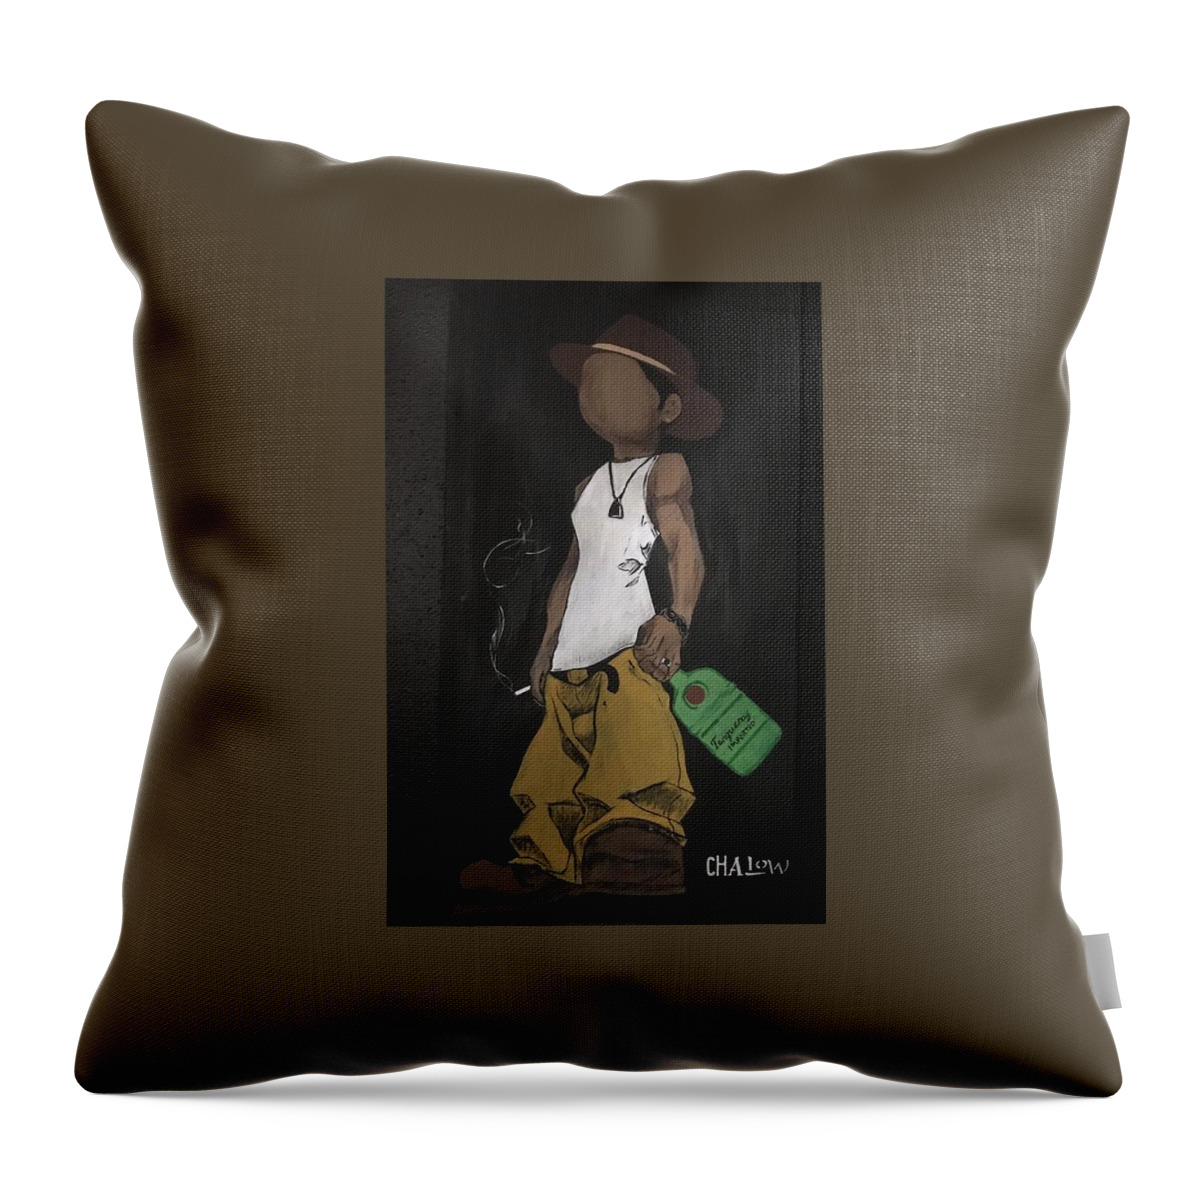  Throw Pillow featuring the painting Back N The Day Dude by Charles Young